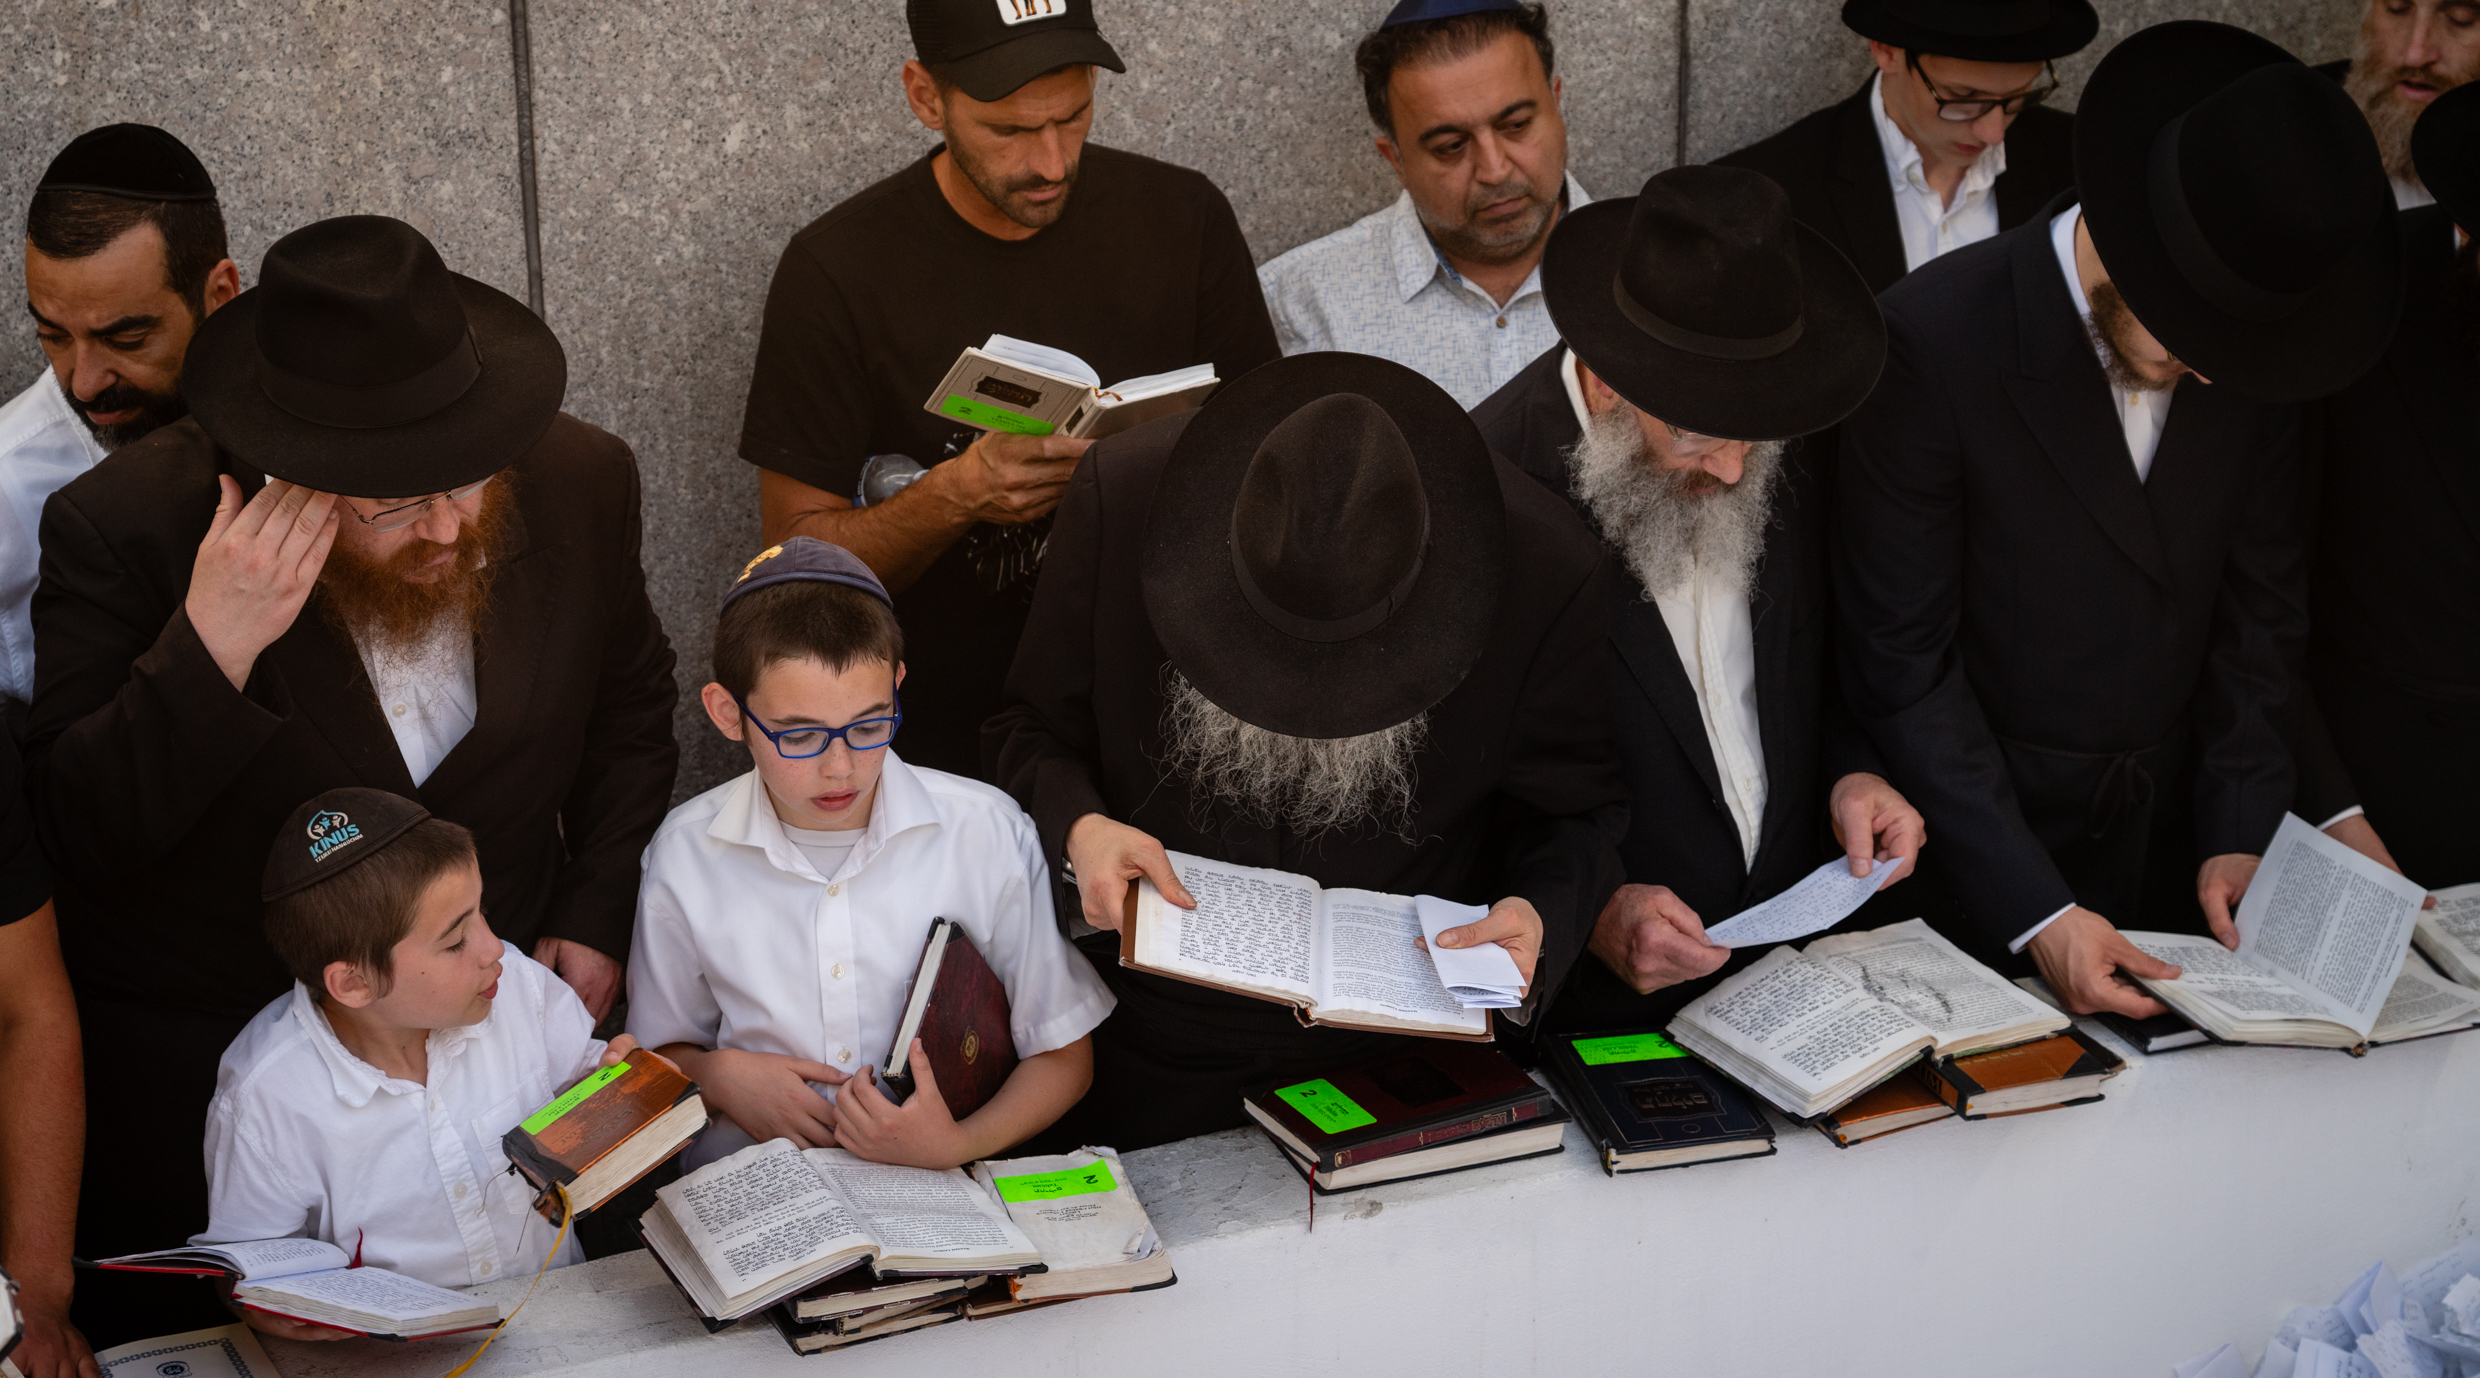 Worshipers at the resting place of Rabbi Menachem Mendel Schneerson, the Lubavitcher rebbe, on the 30th anniversary of his passing, in Queens, July 8, 2024. (Luke Tress)